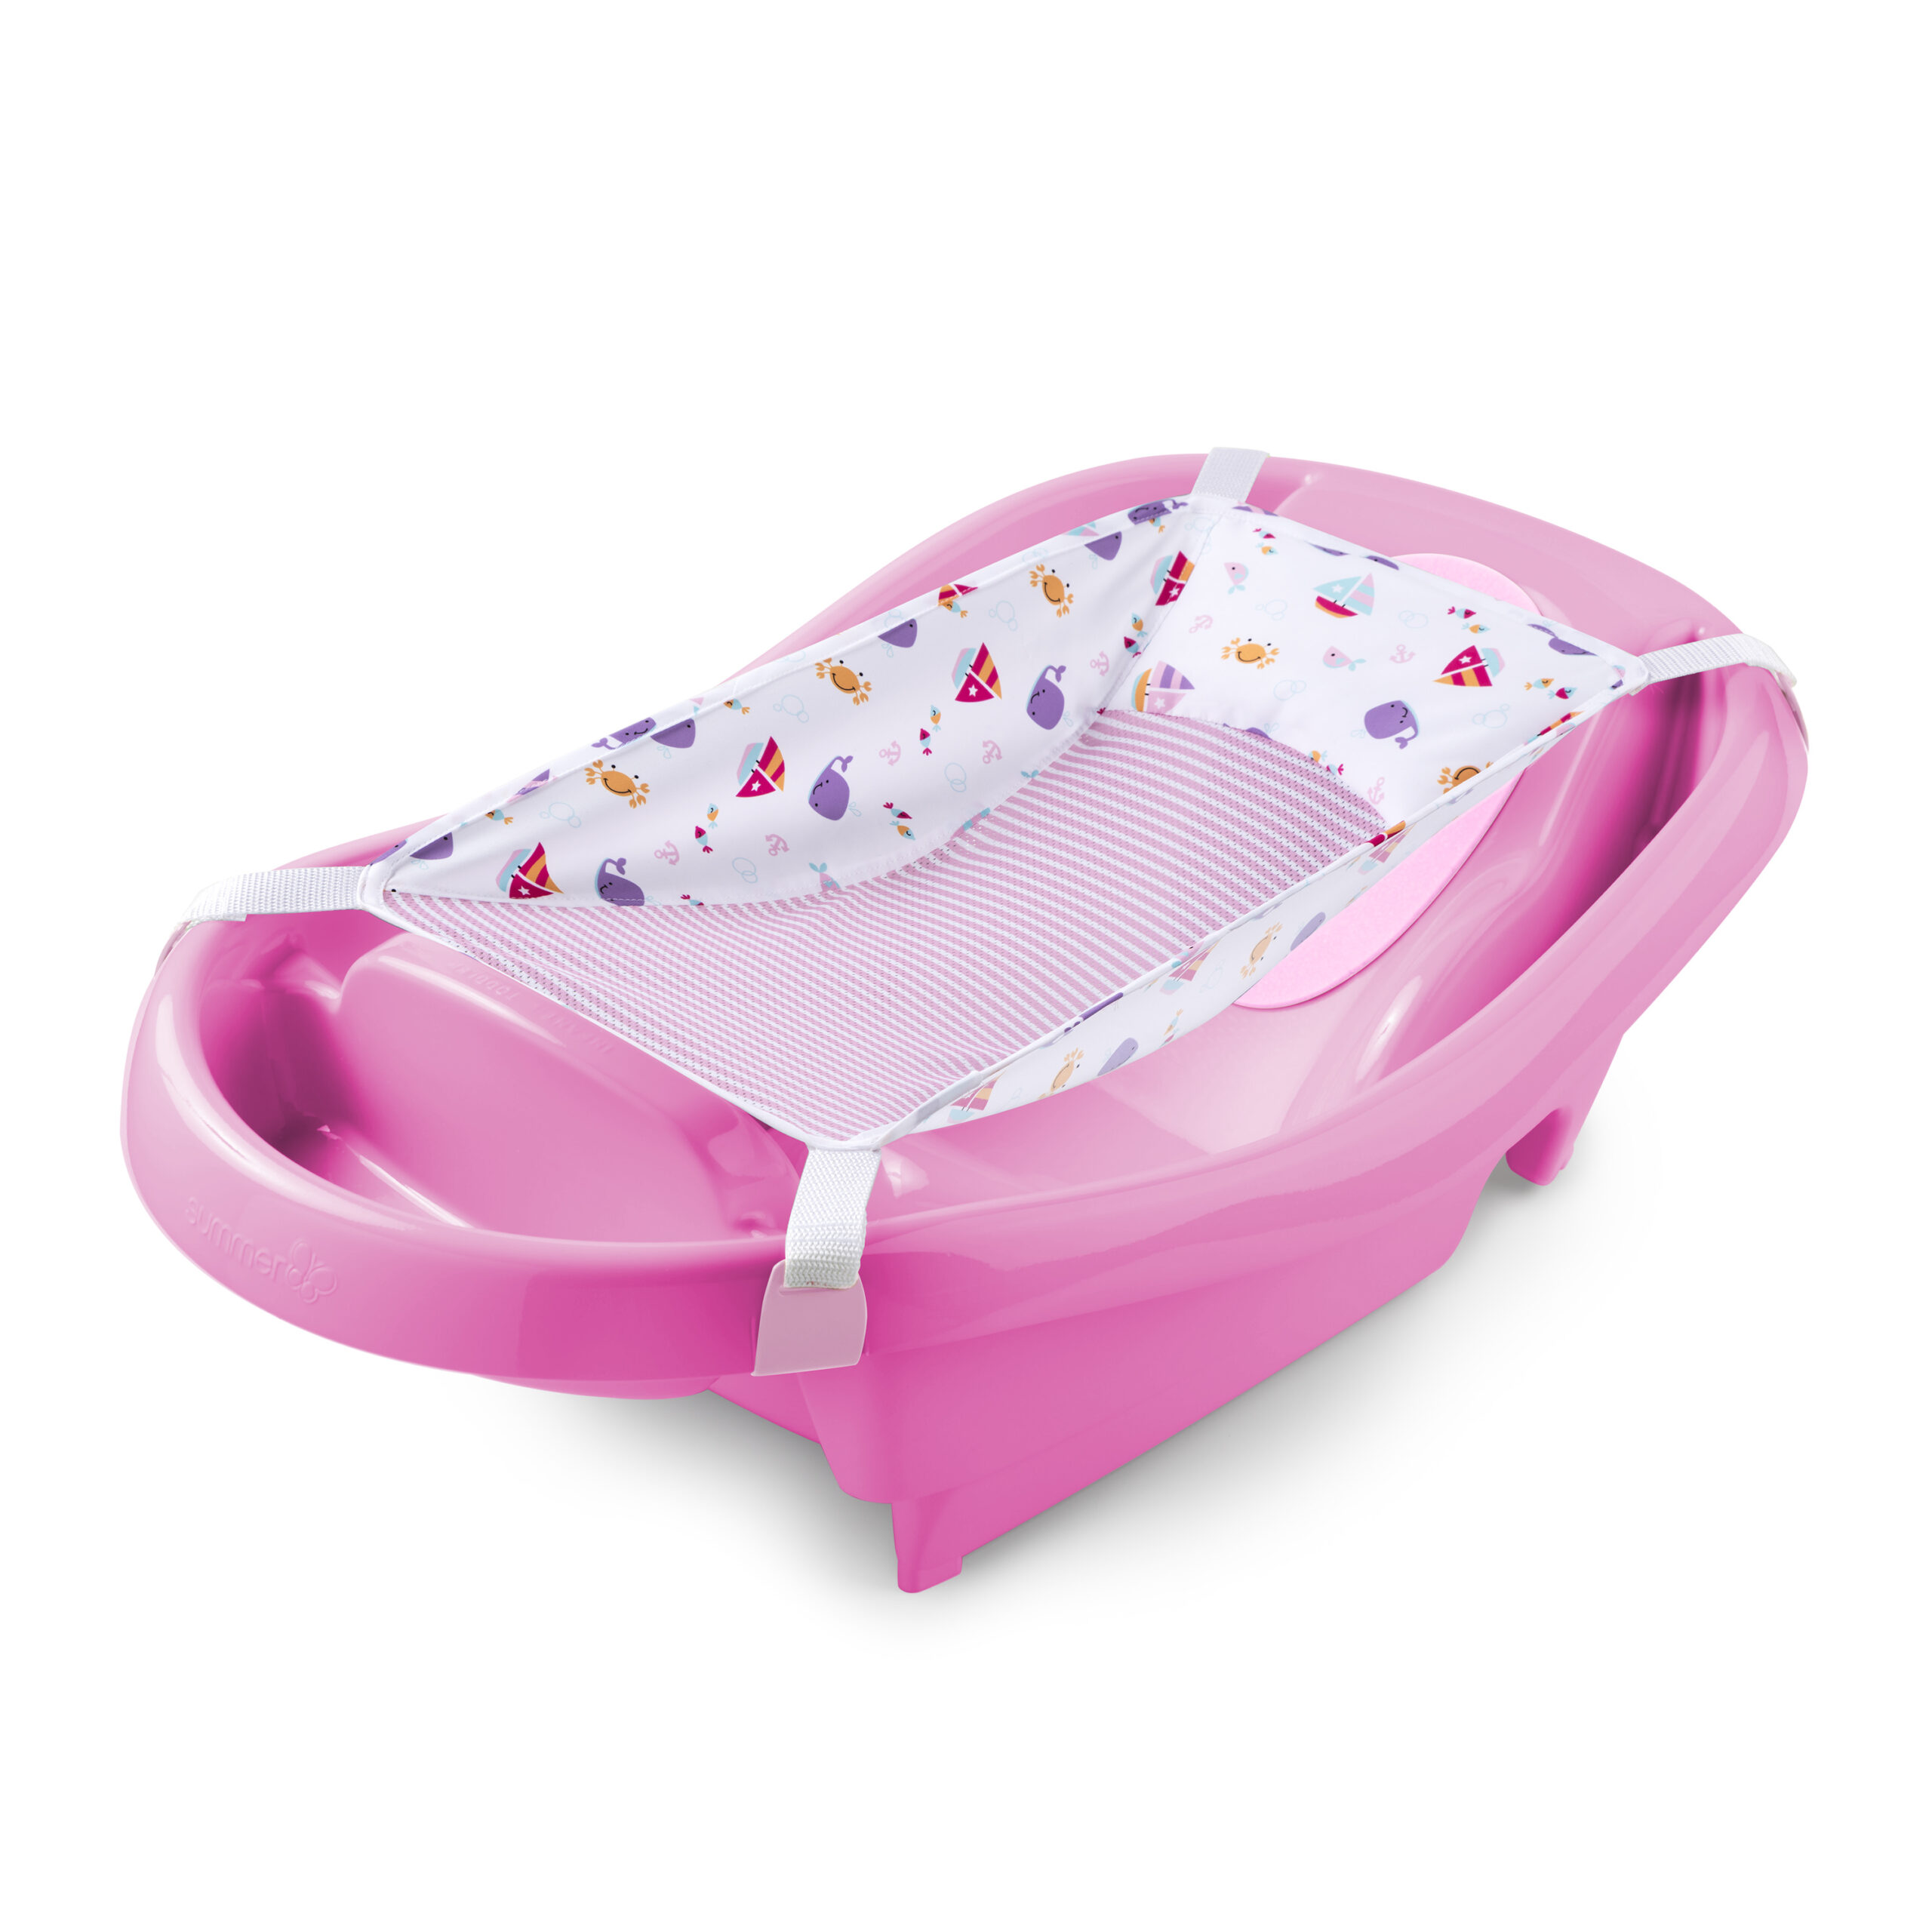 Summer Comby Infant Bath Tub Birth - 2 Years - Pink